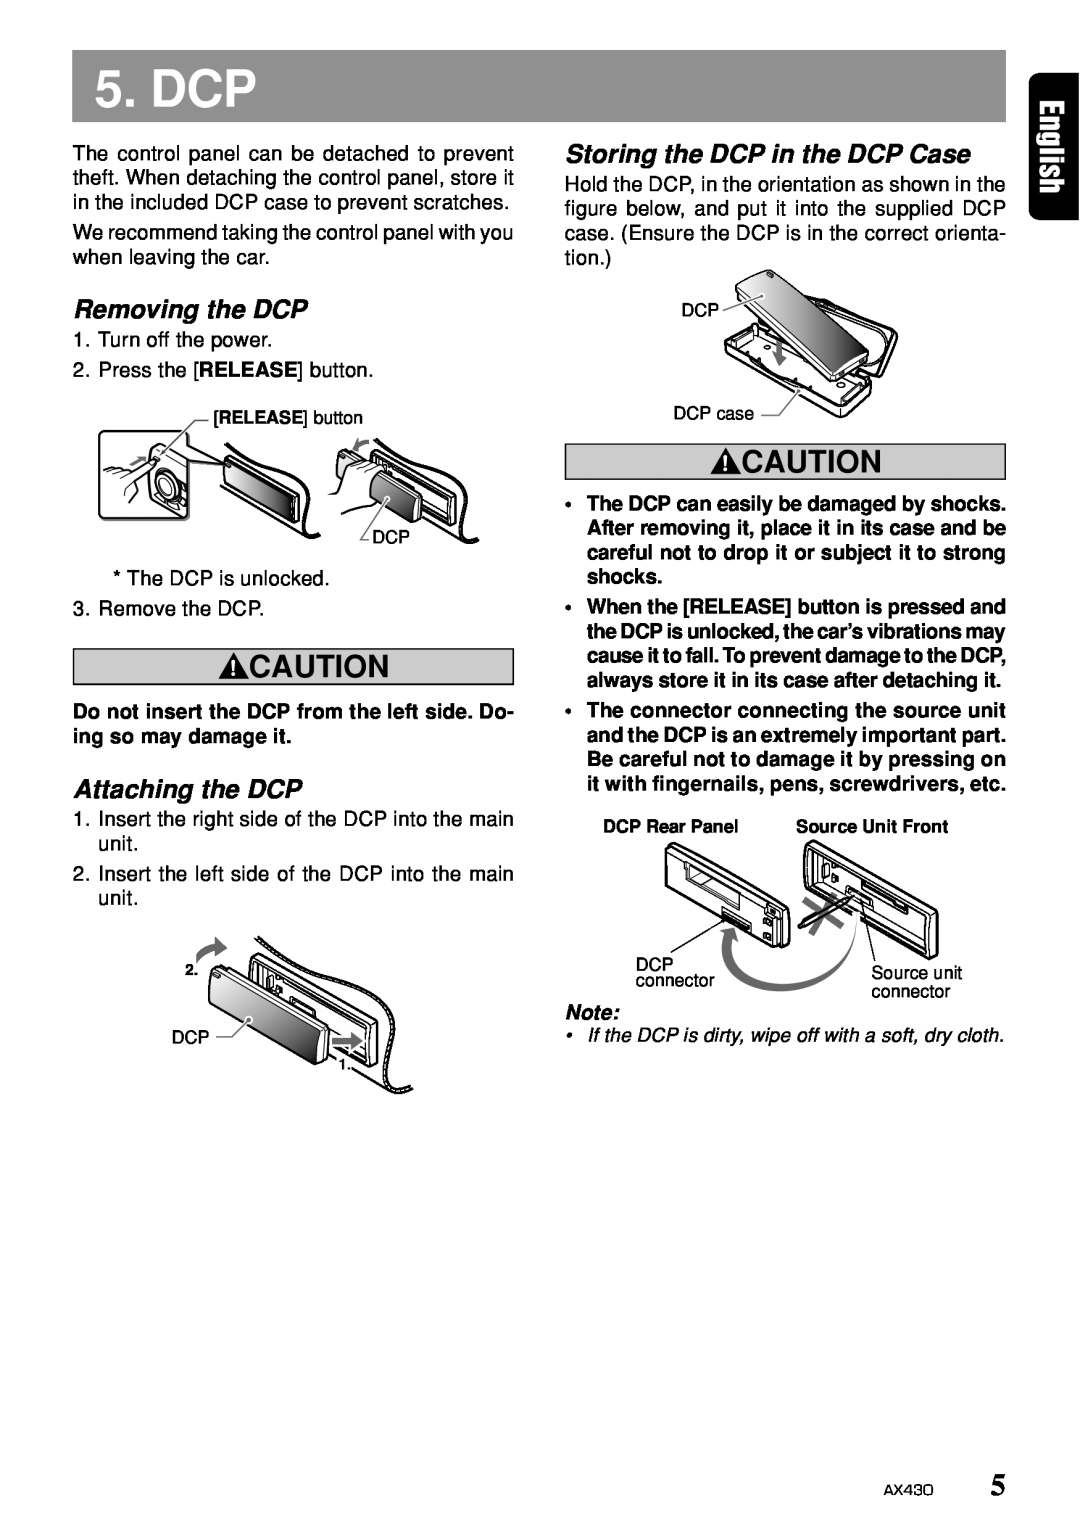 Clarion AX430 owner manual Dcp, Removing the DCP, Attaching the DCP, Storing the DCP in the DCP Case 